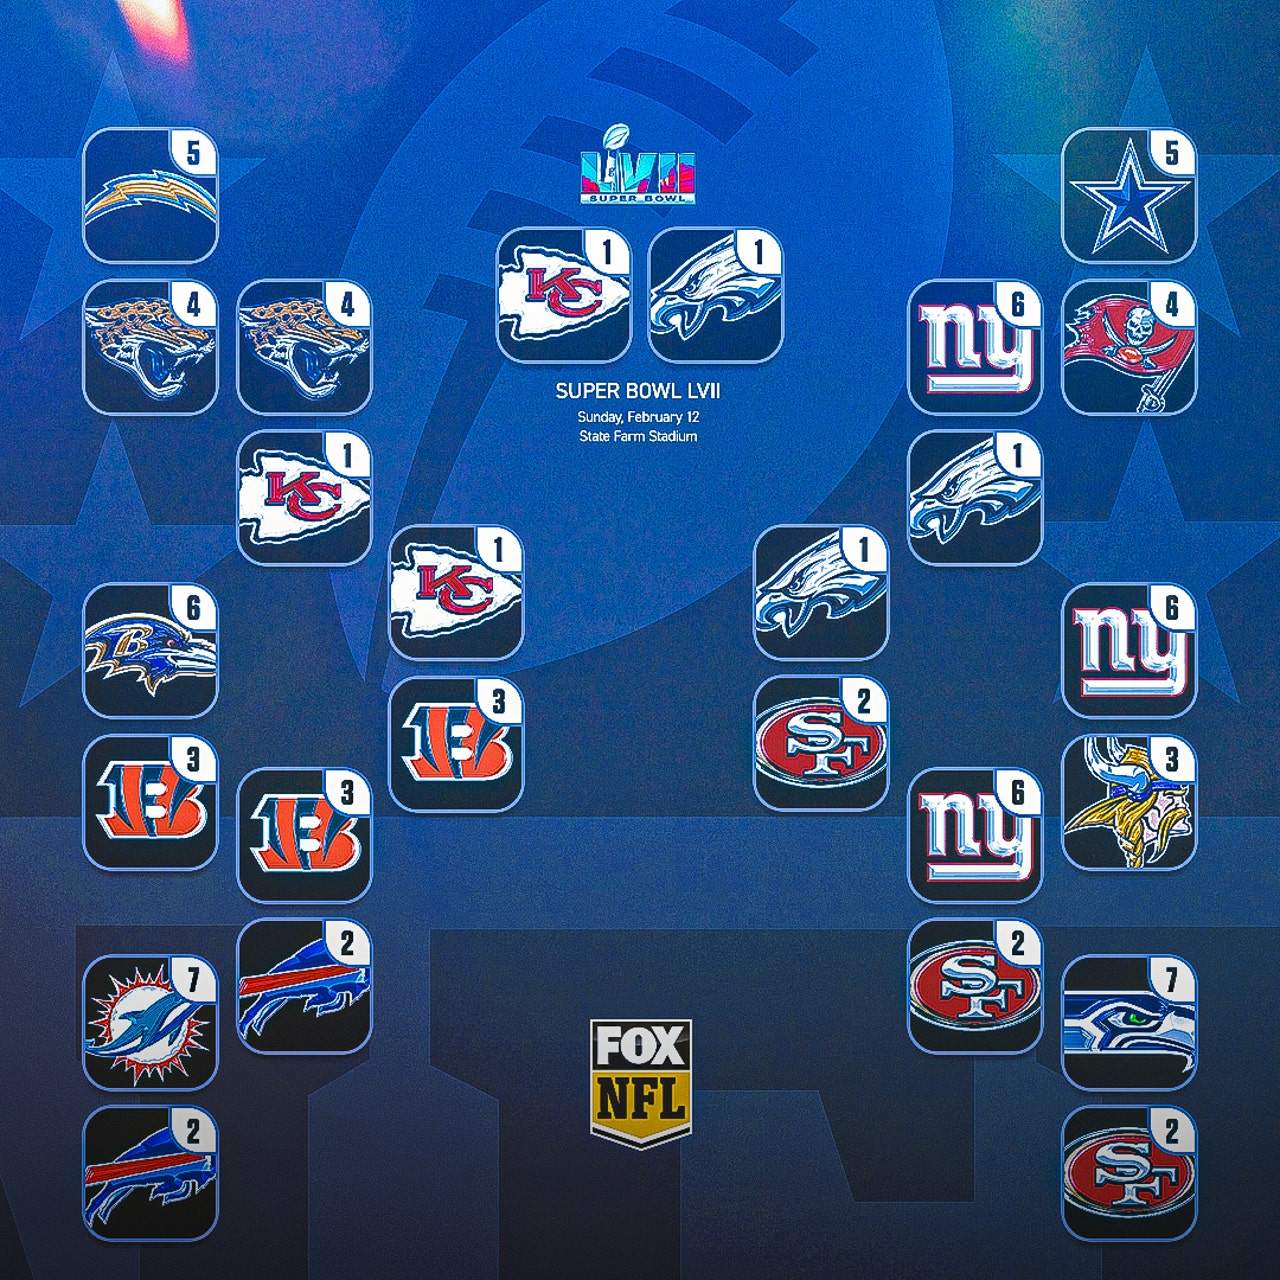 divisional round predictions 2023